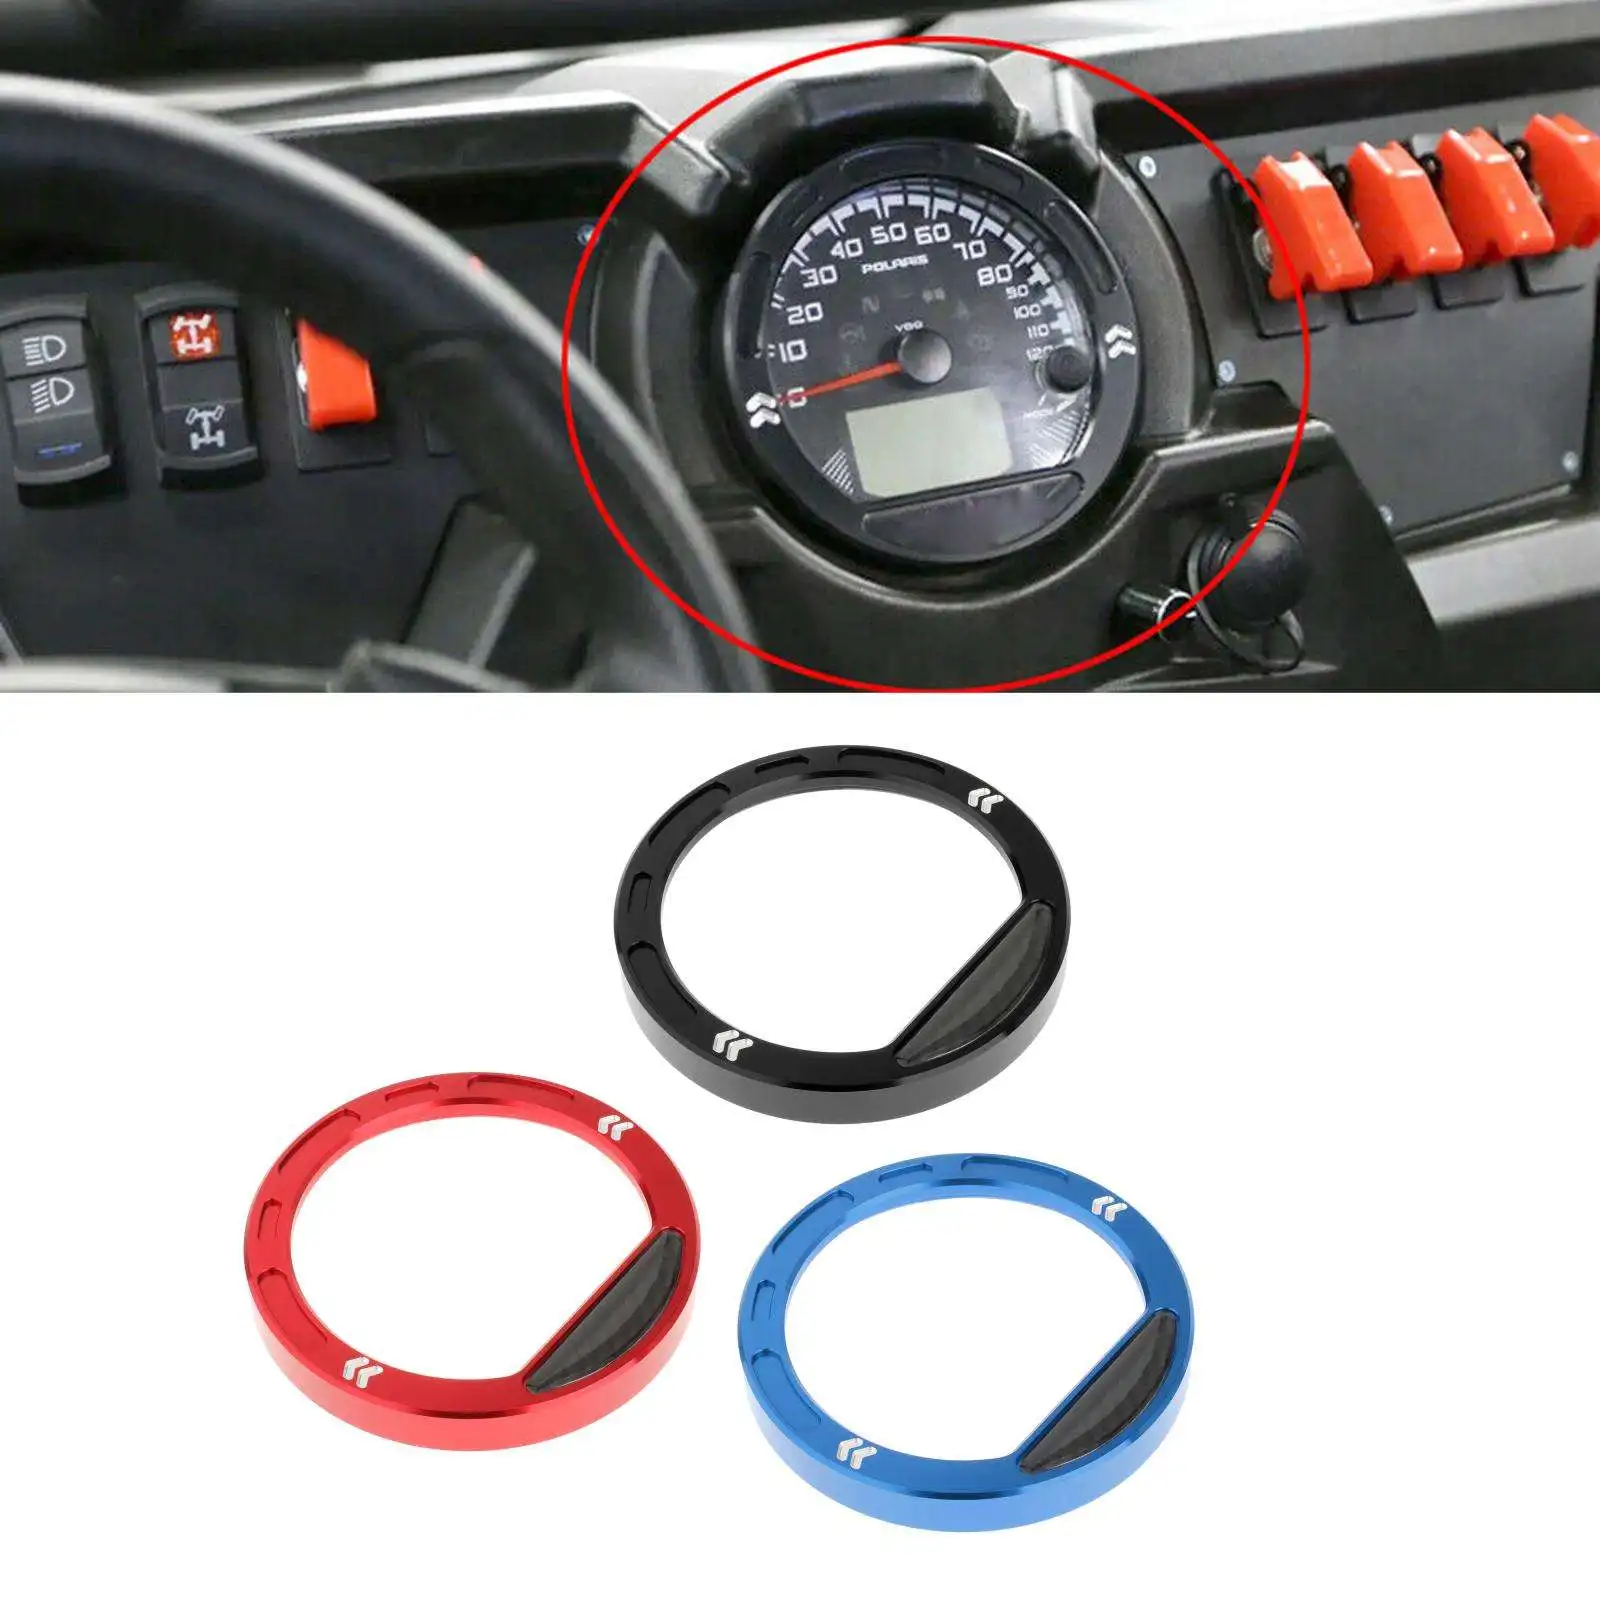 Motorcycle Speedometer Guage Bezel Cover Trim Replacement for Polaris RZR 570 800 900 RZR 1000